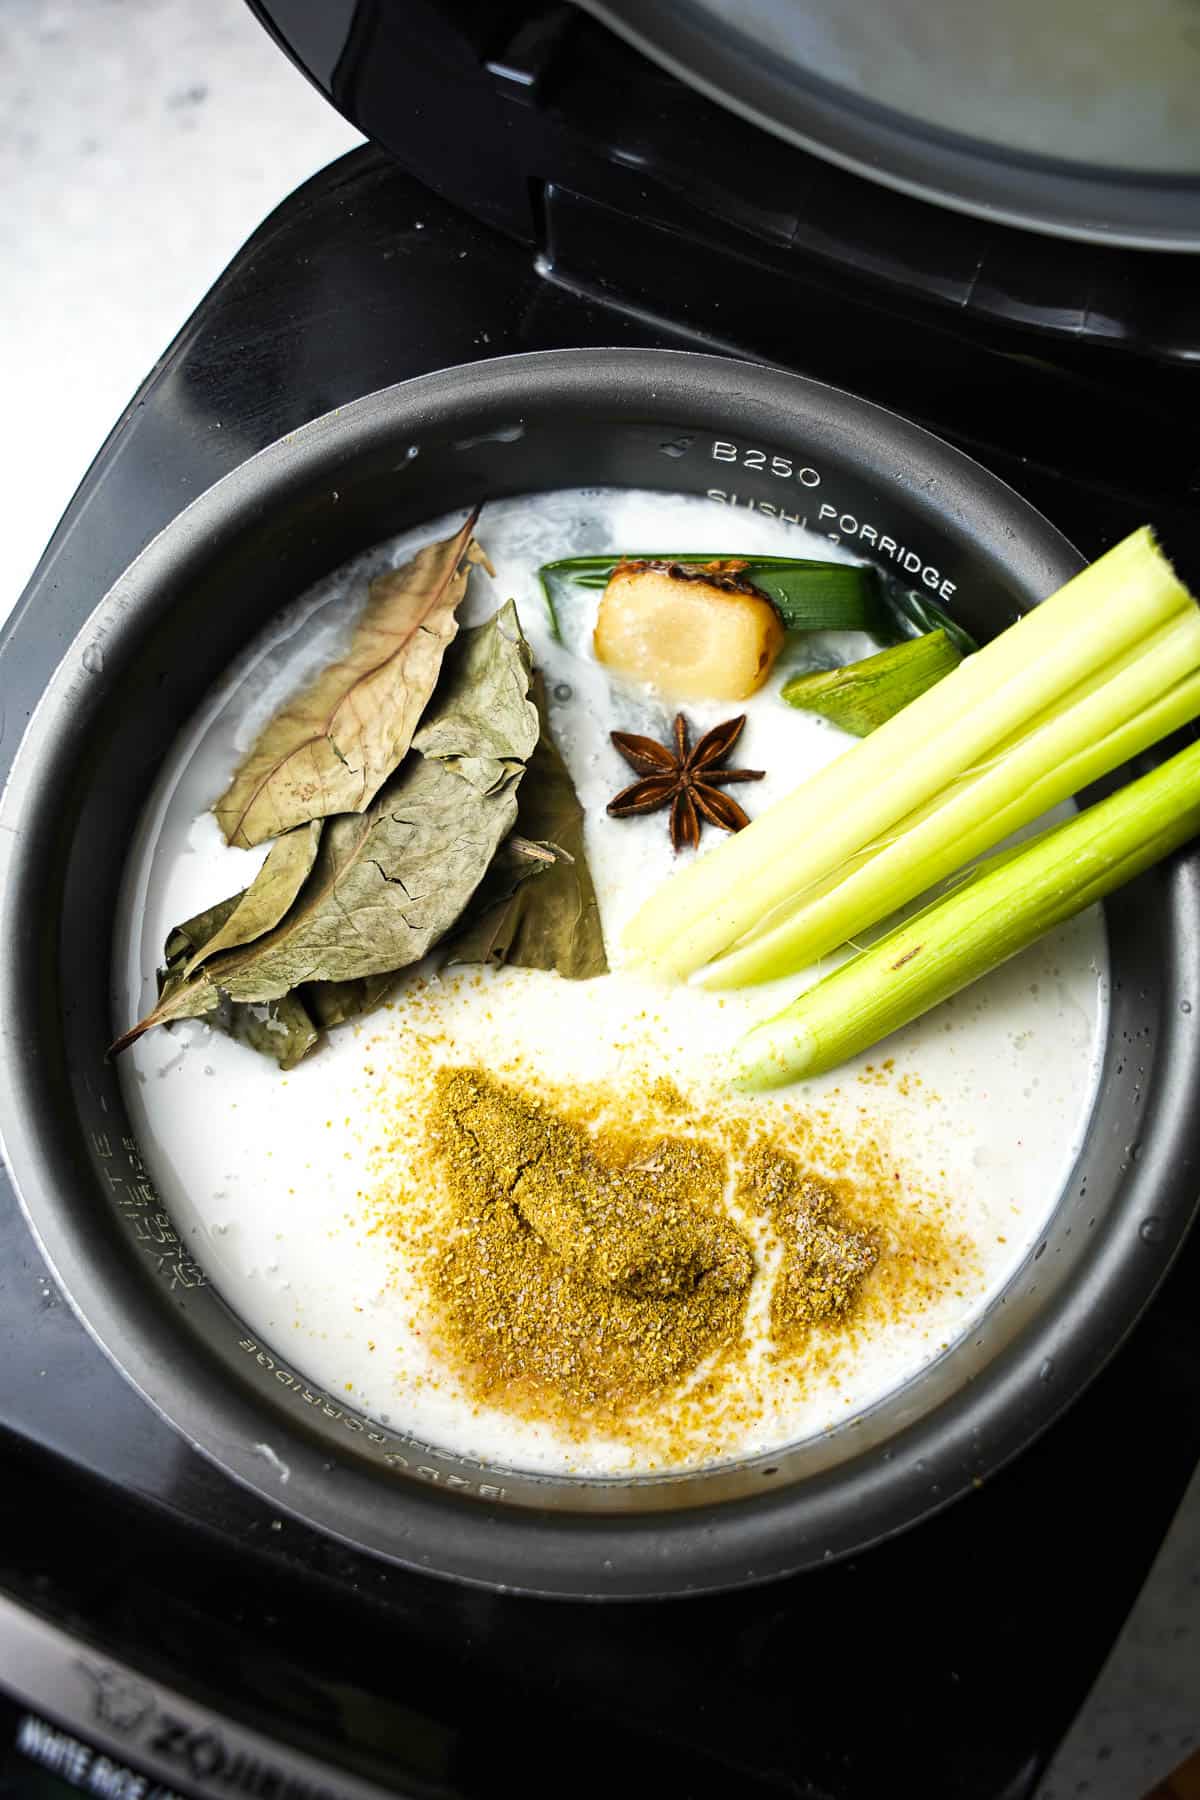 Rice is cooked in a rice cooker. You can see the Indonesian bay leaves, ginger, galangal, pandan, lemongrass, and star anise floating in the coconut milk.